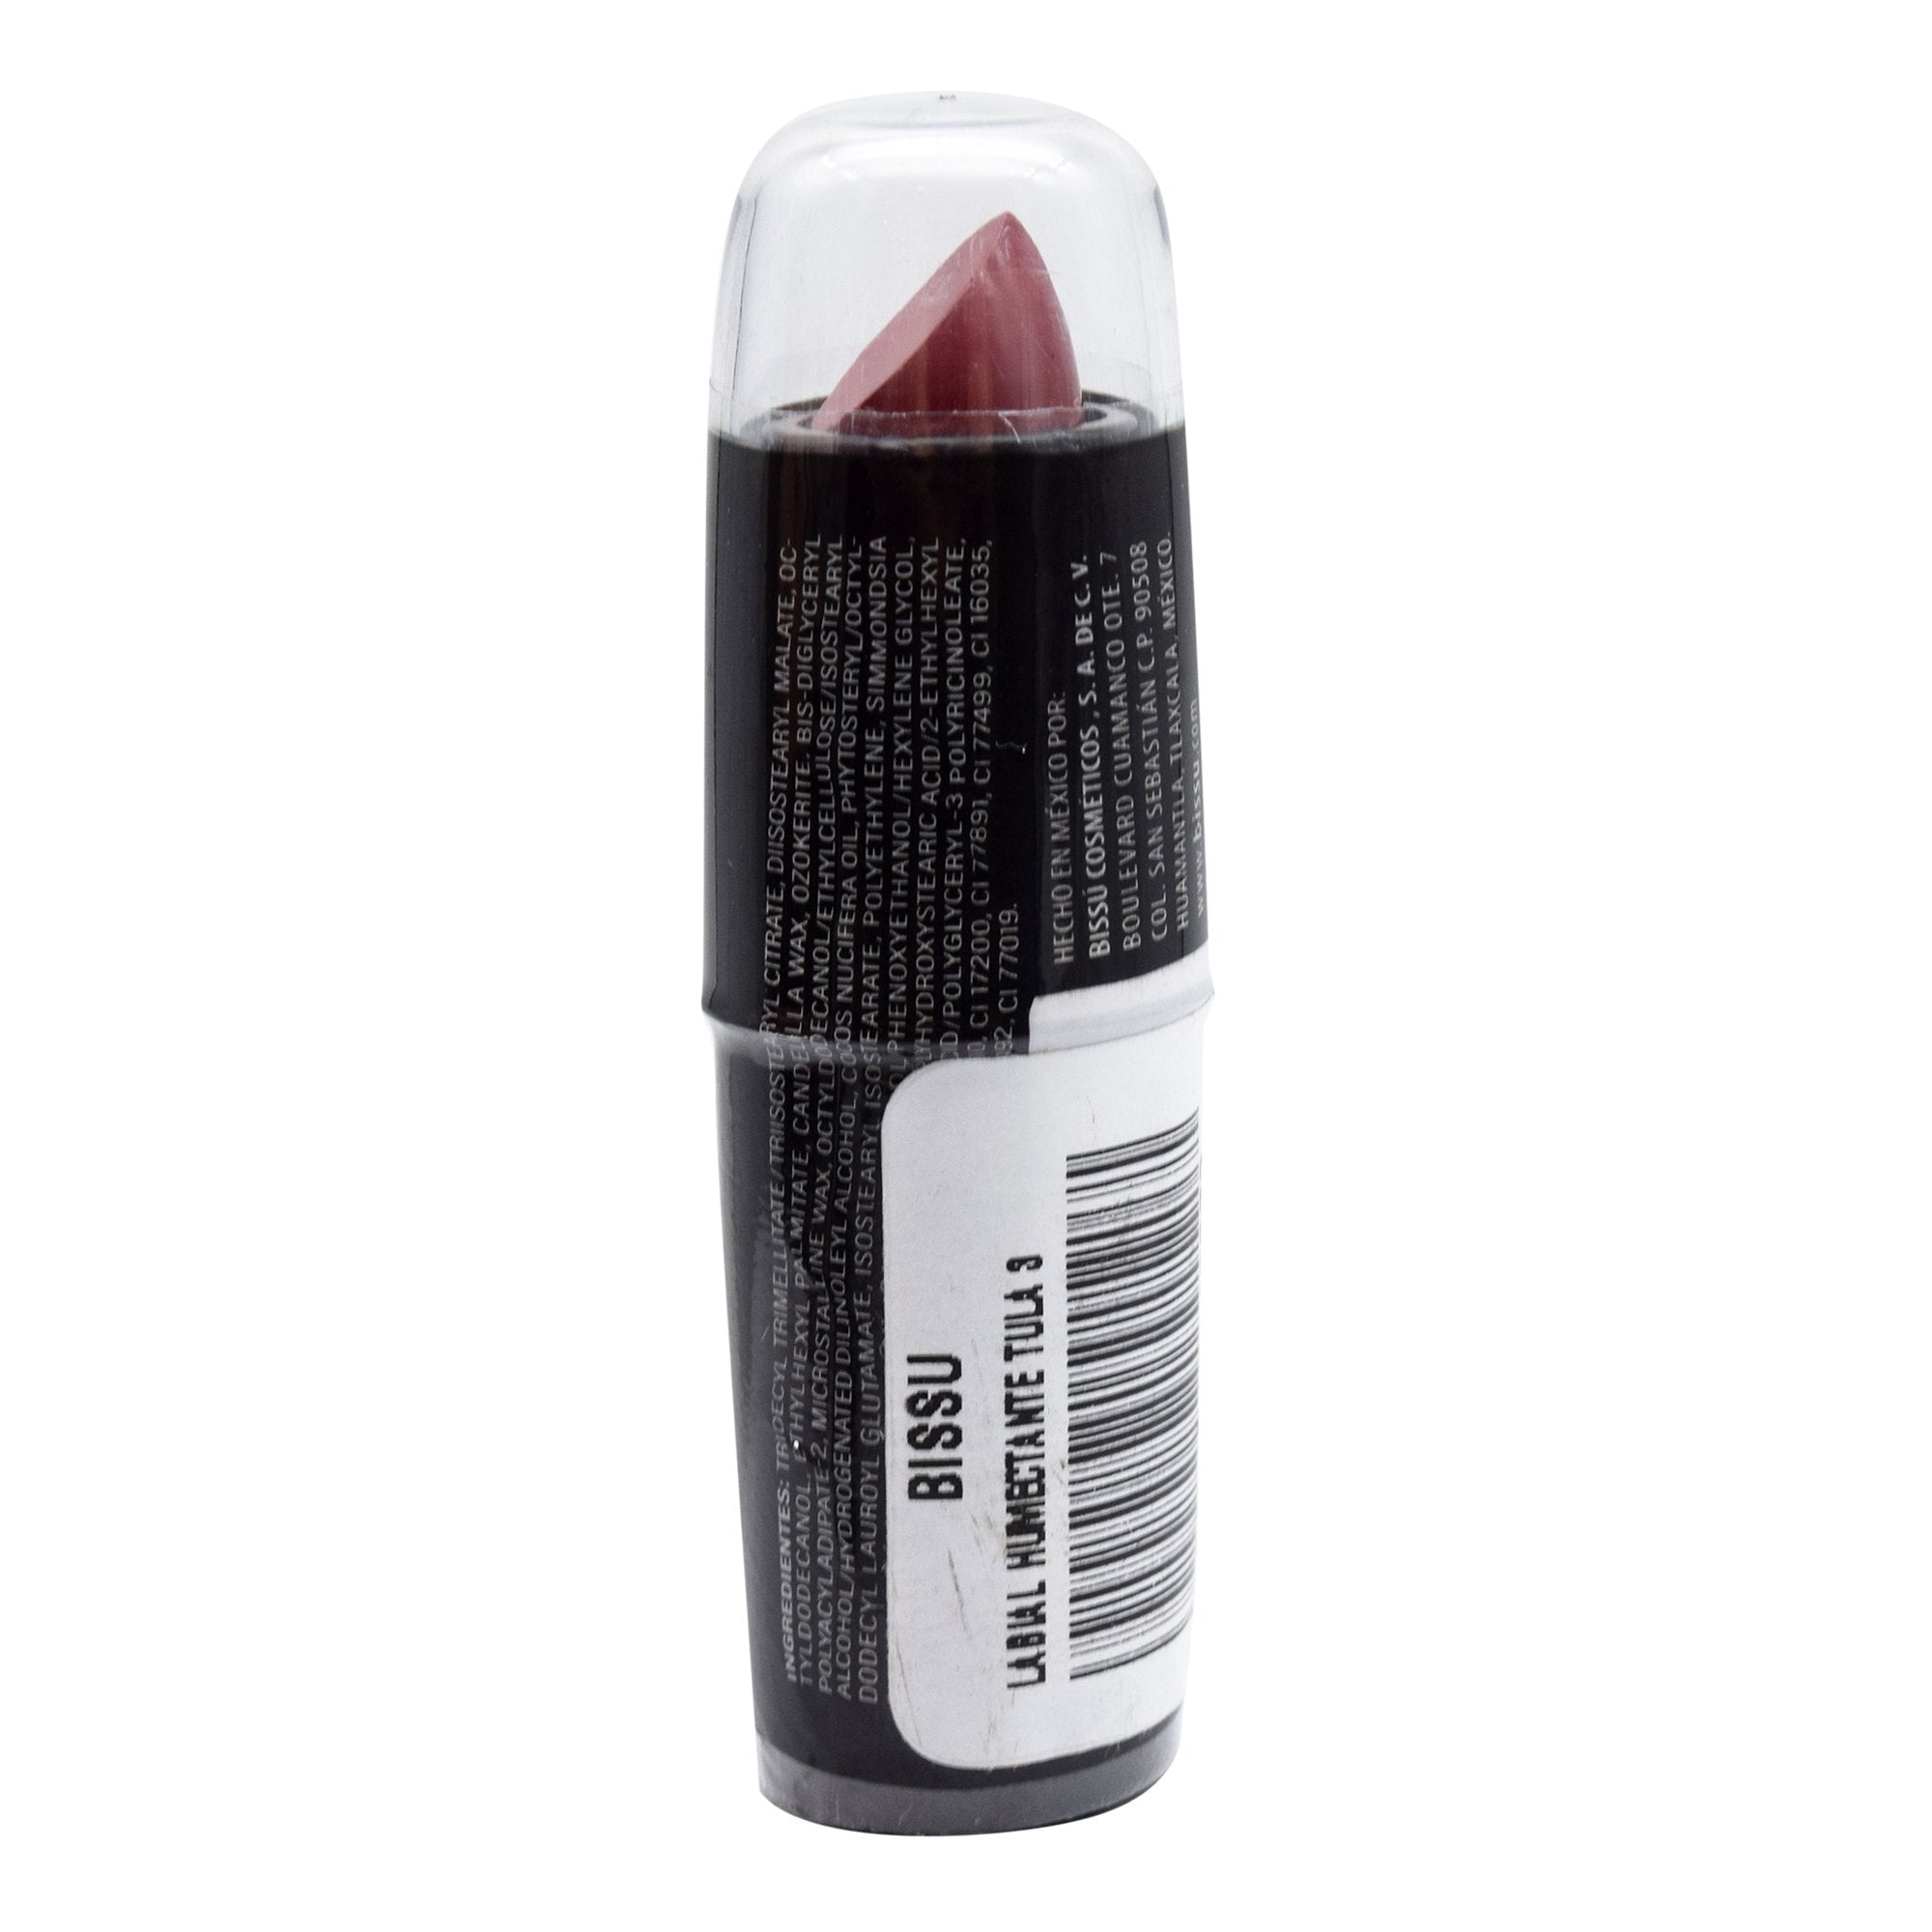 Labial Humectante Tula 4.1 G